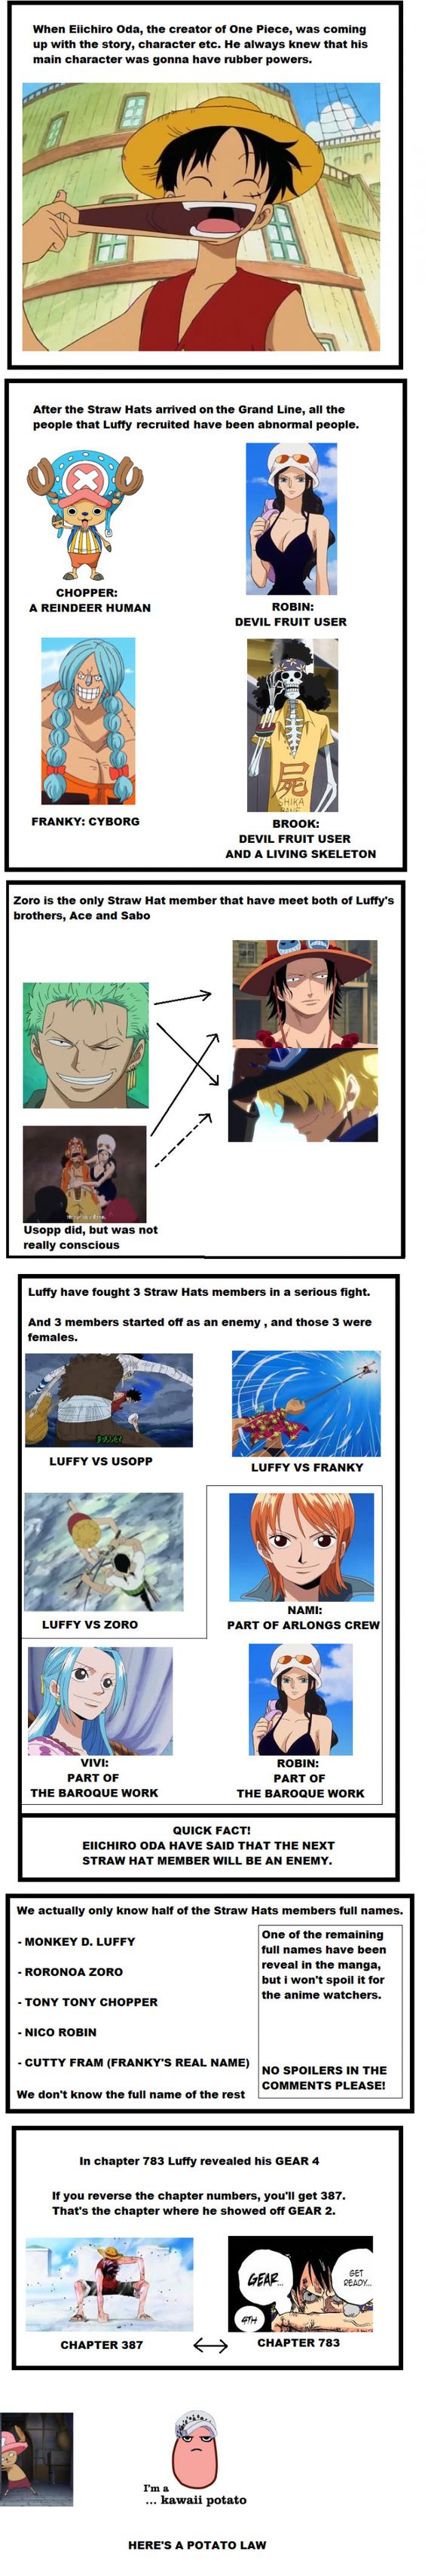 Random One Piece facts PART 2! This time, 